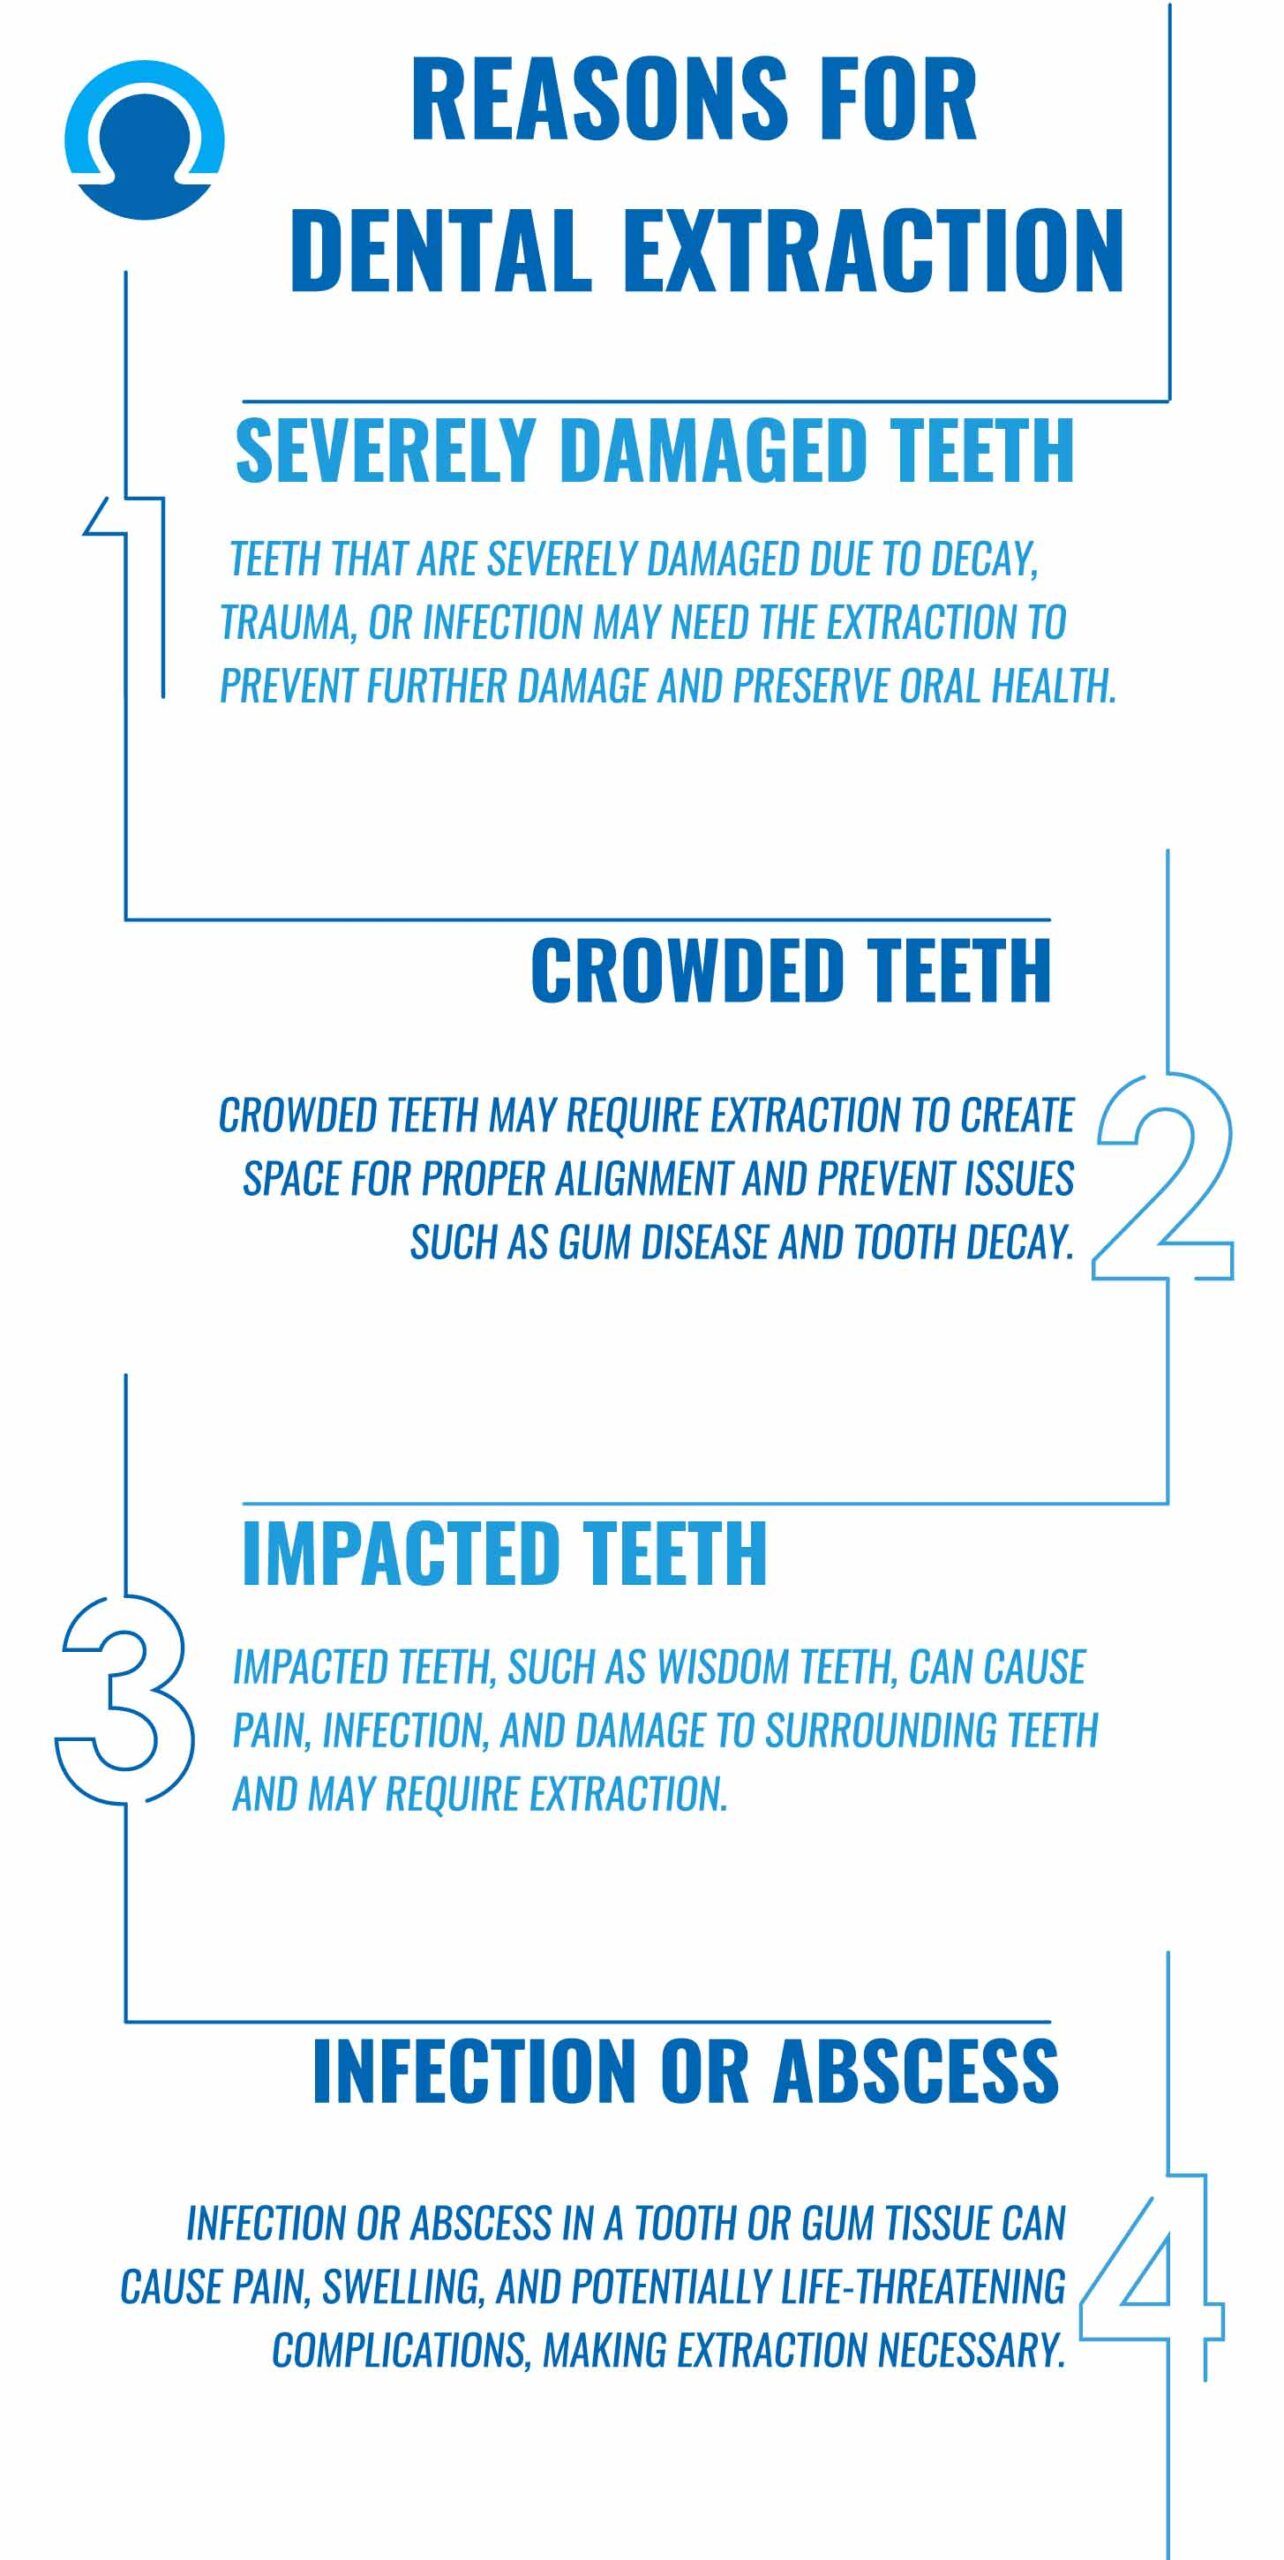 Reasons for Dental Extraction